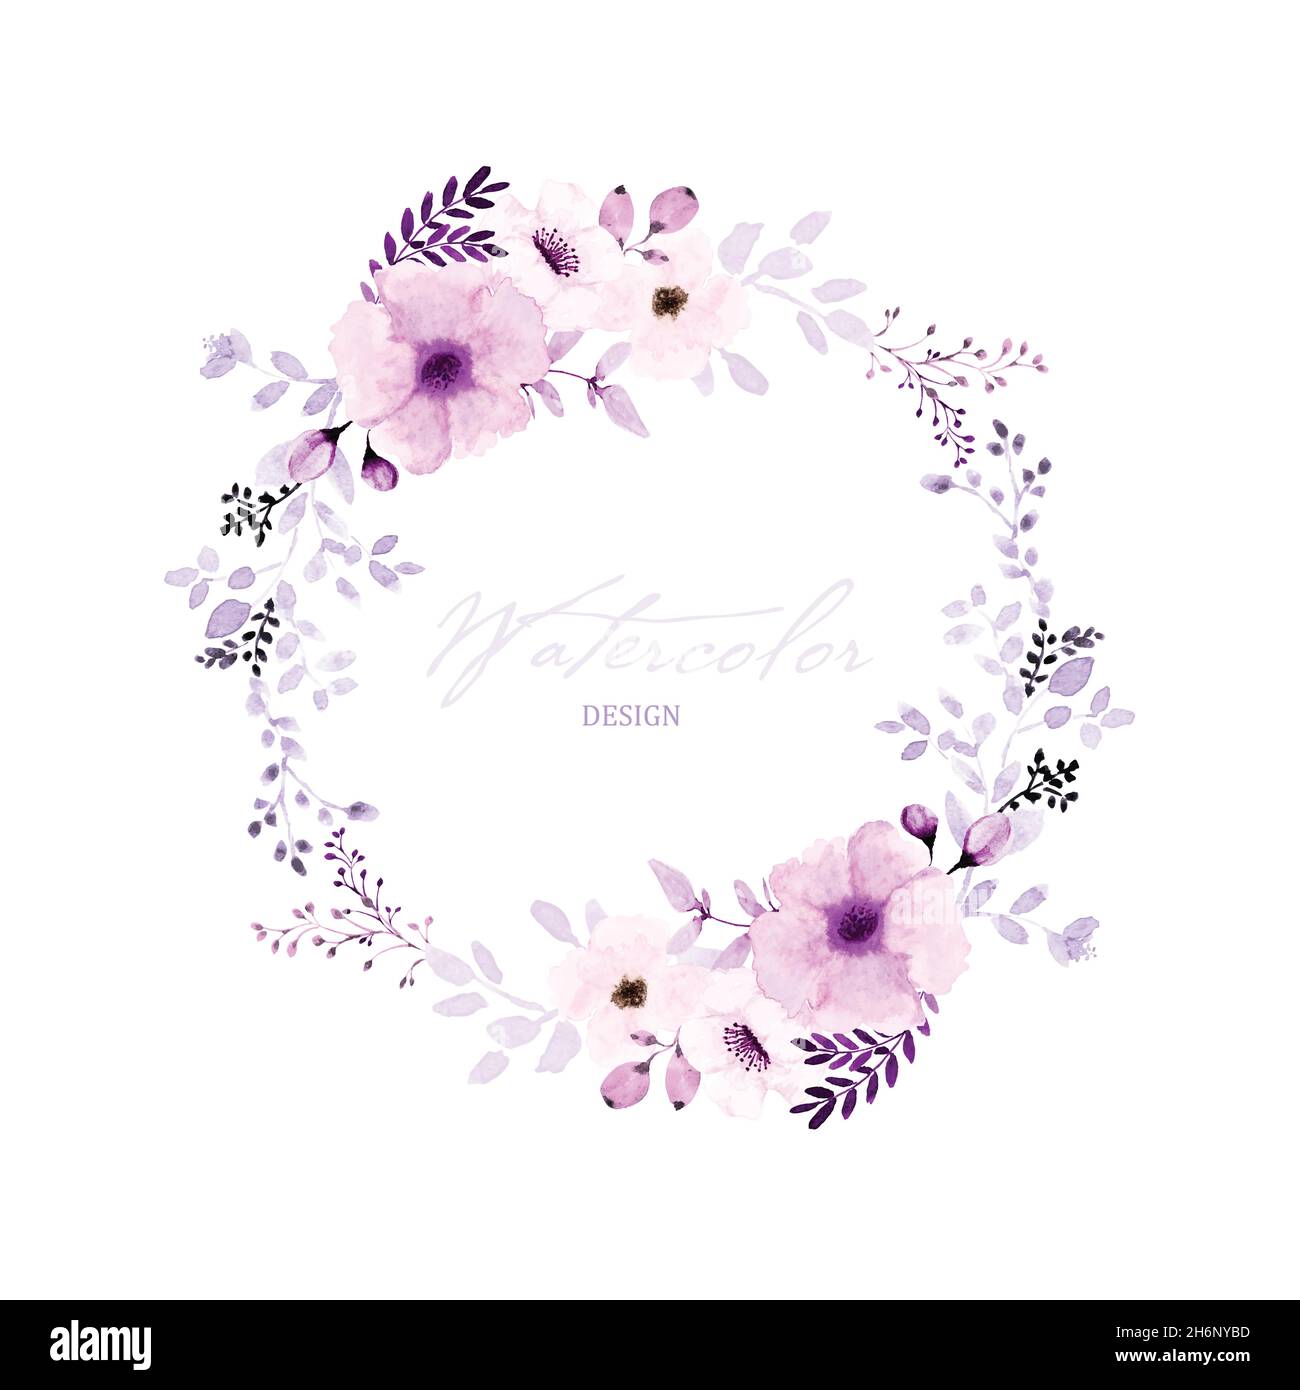 Watercolor wreath design with purple flowers and leaves. Watercolor hand-painted with floral bouquet isolated on white background. Suitable for weddin Stock Vector